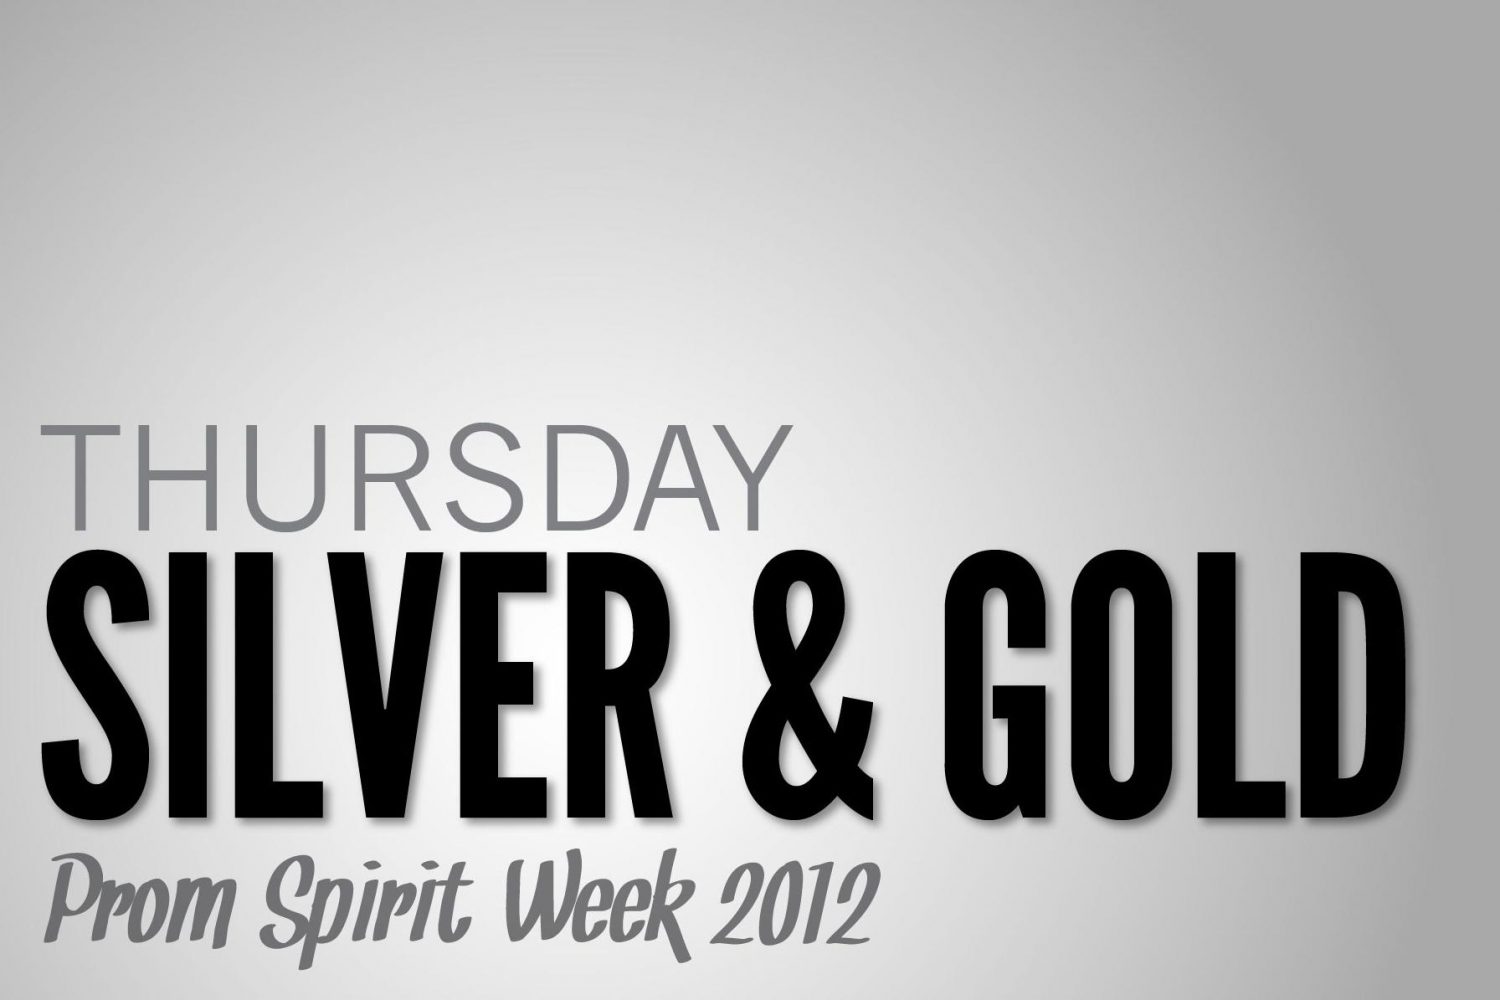 Prom Spirit Week: Silver and Gold Thursday